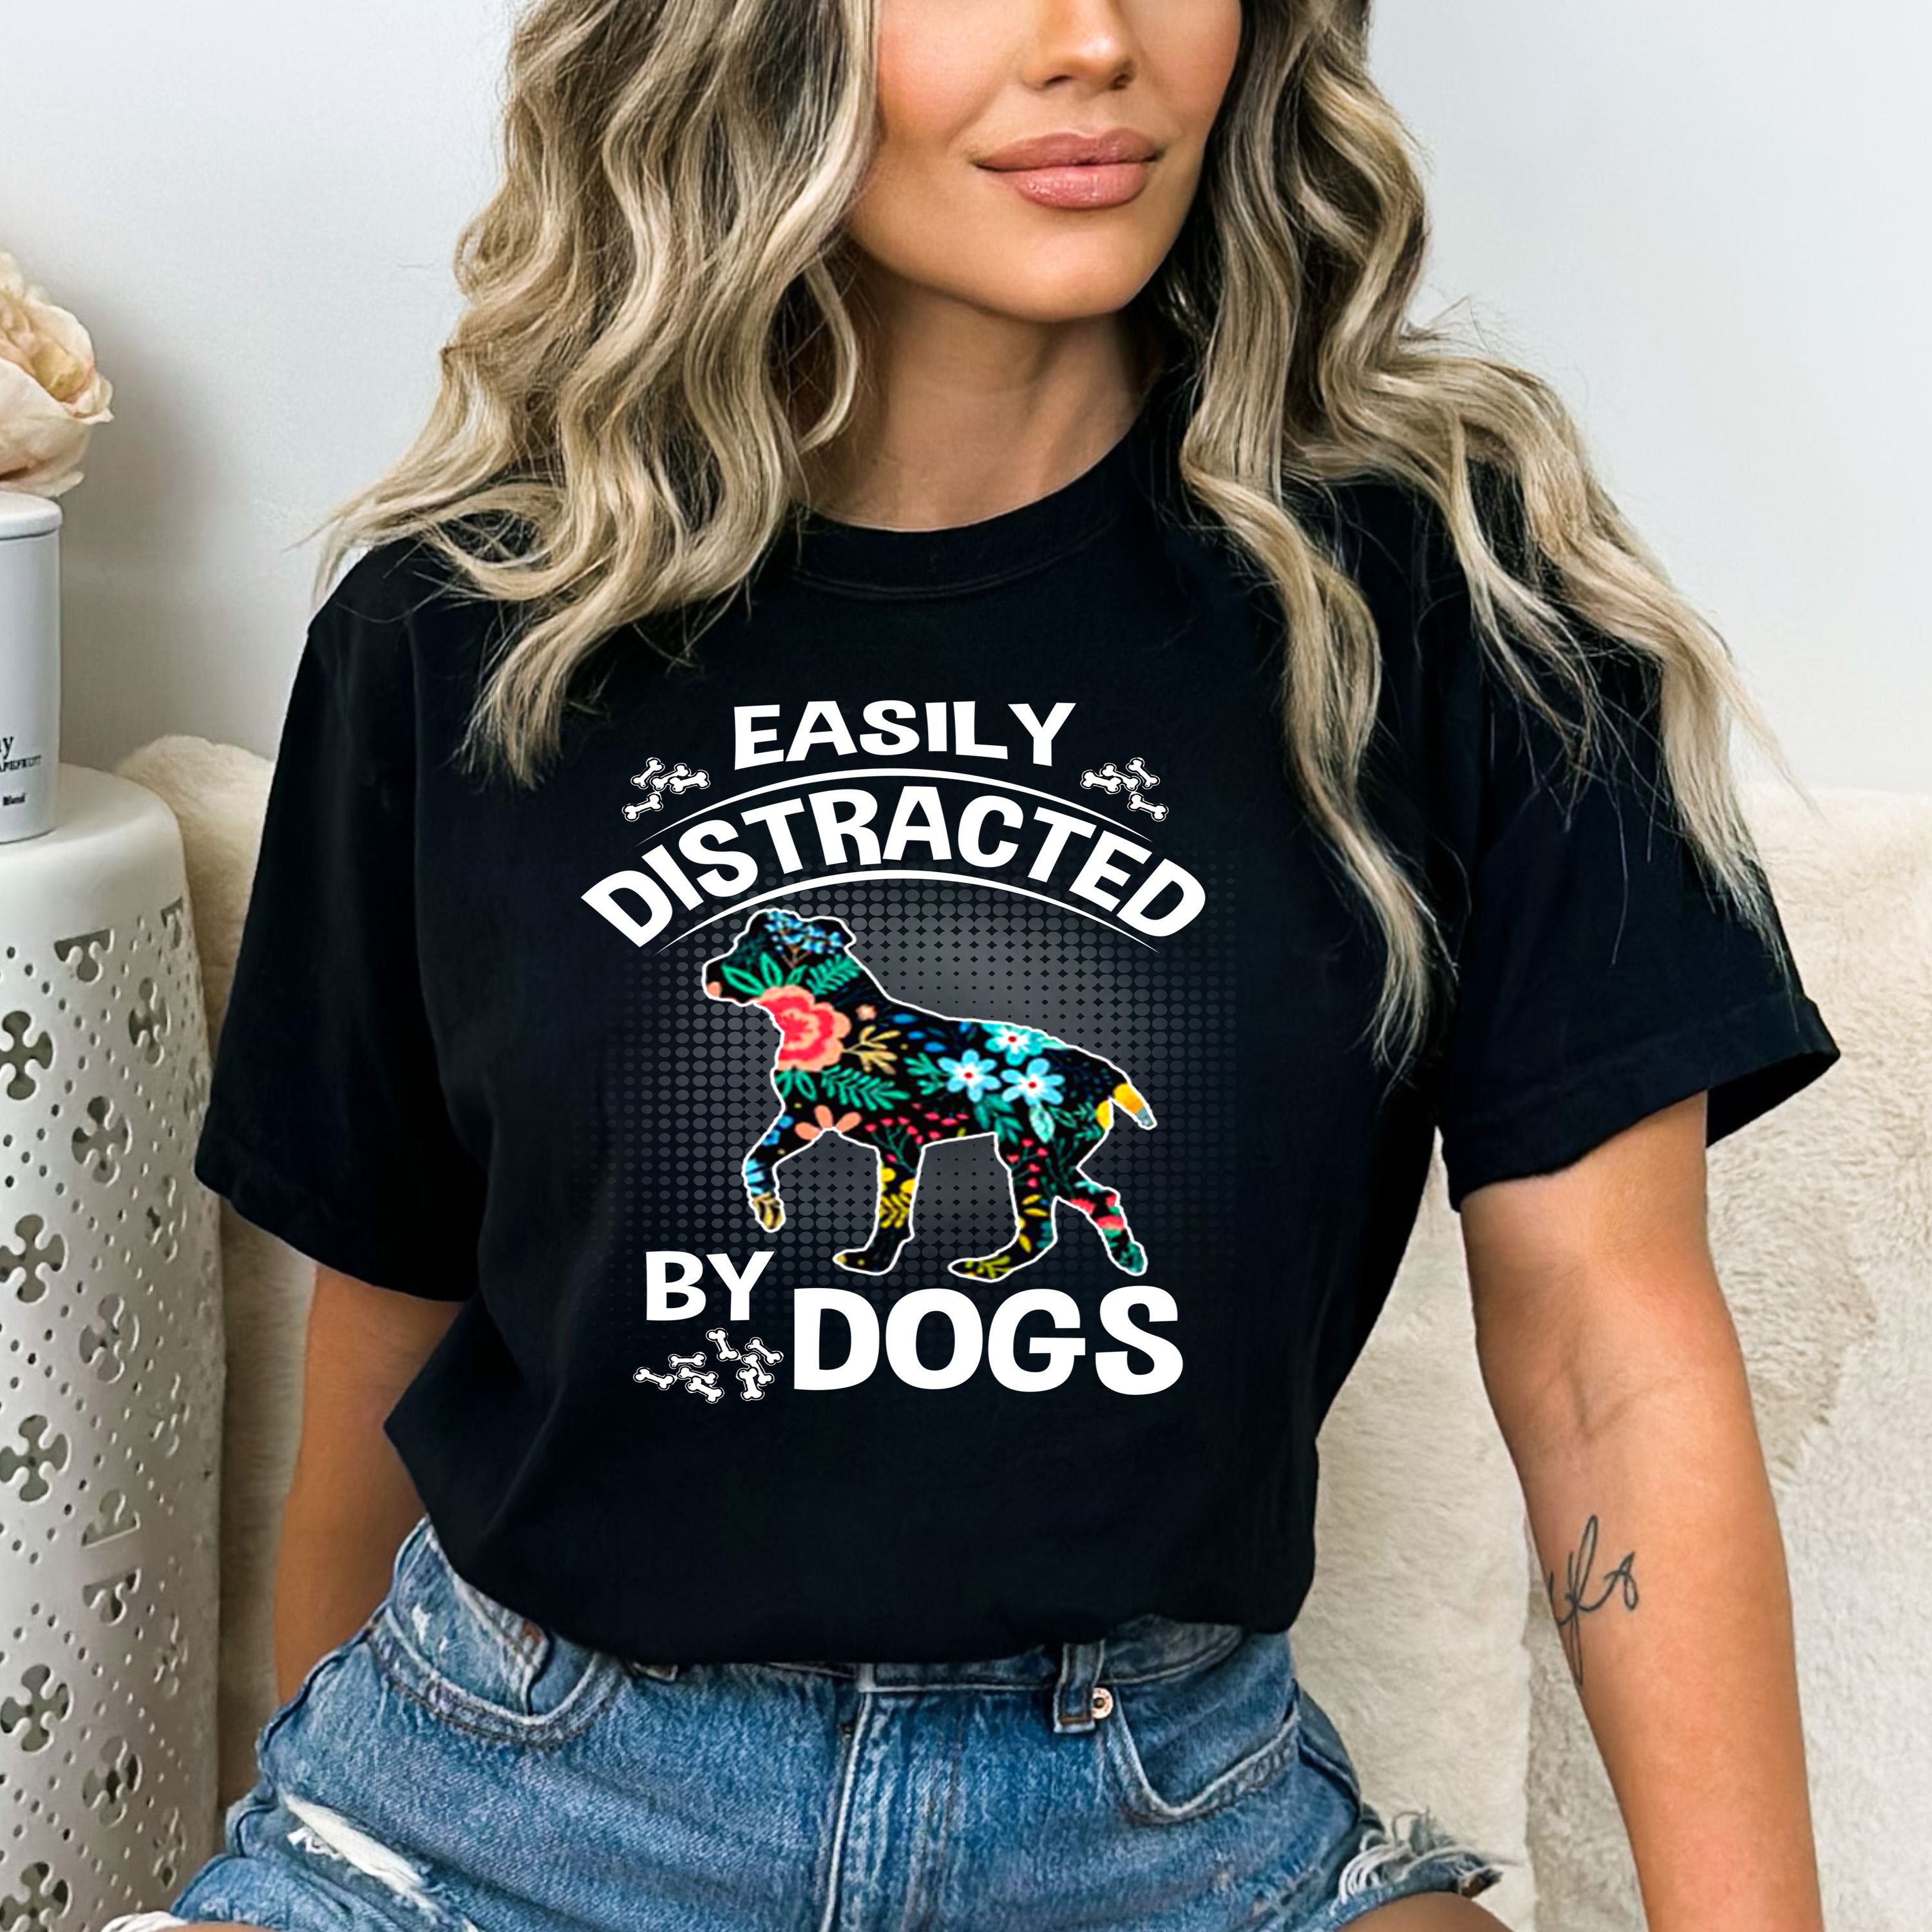 "Easily Distracted By Dogs"